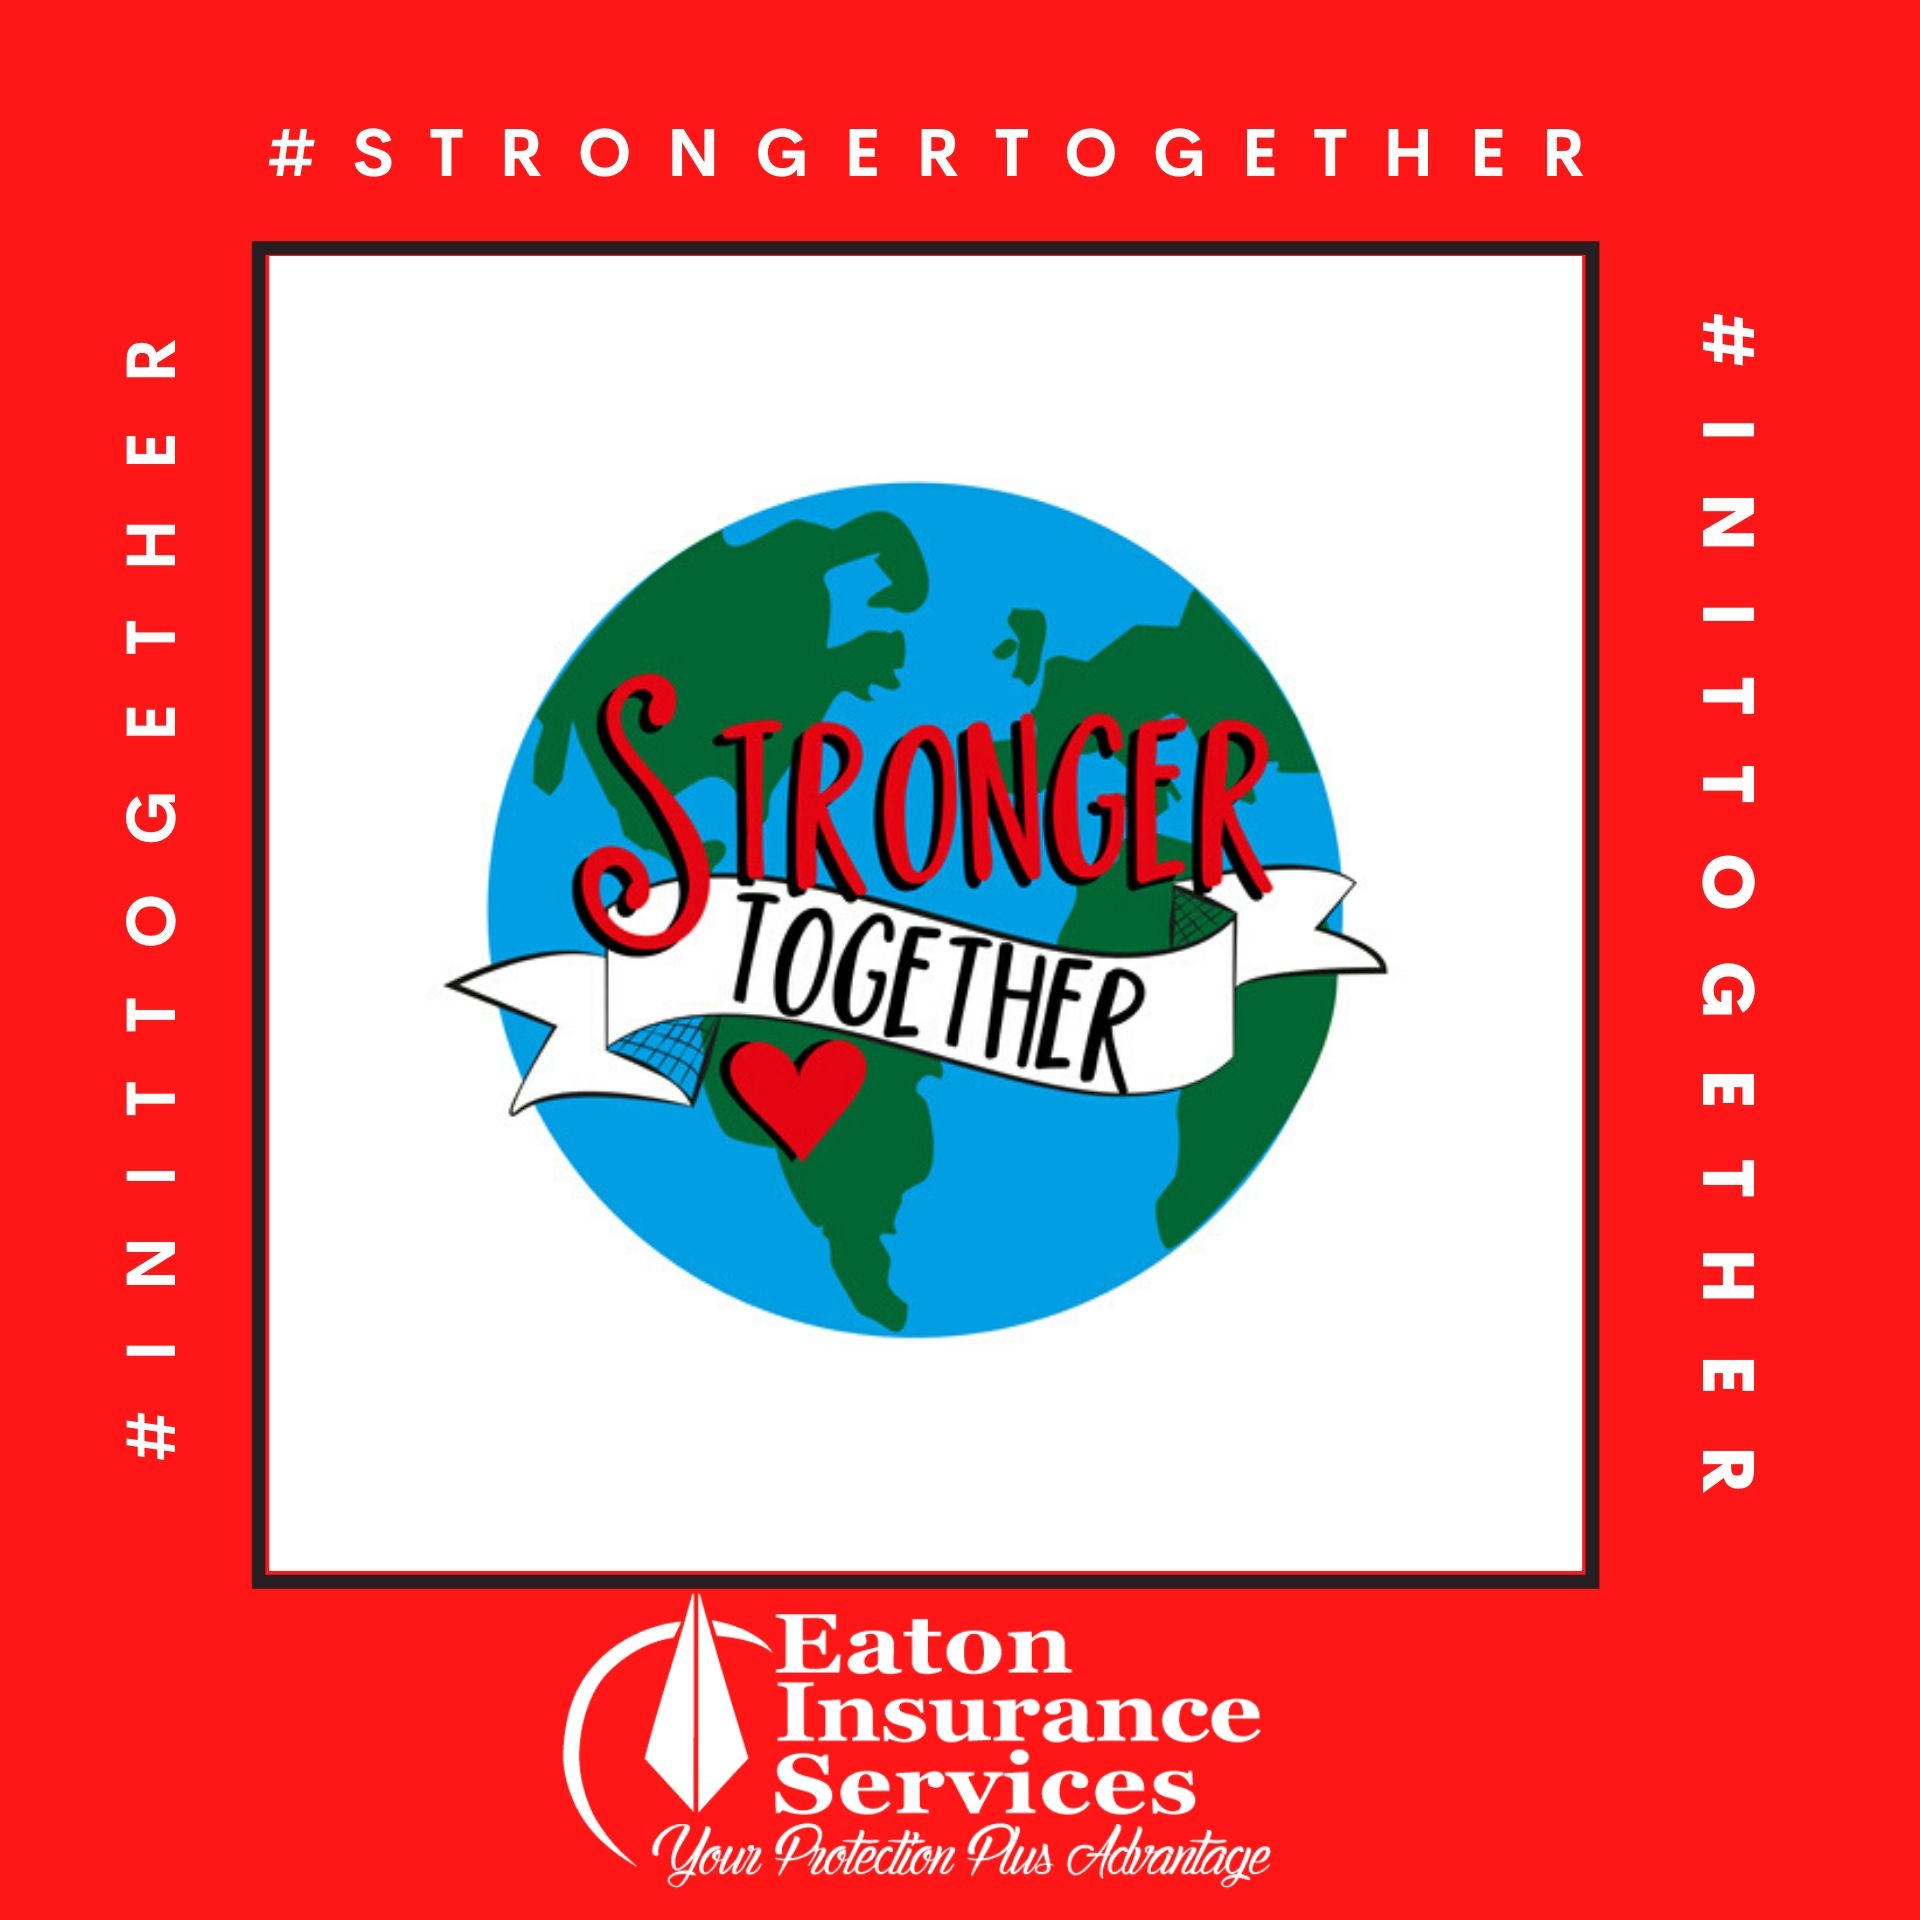 in it together, stronger together, clio michigan